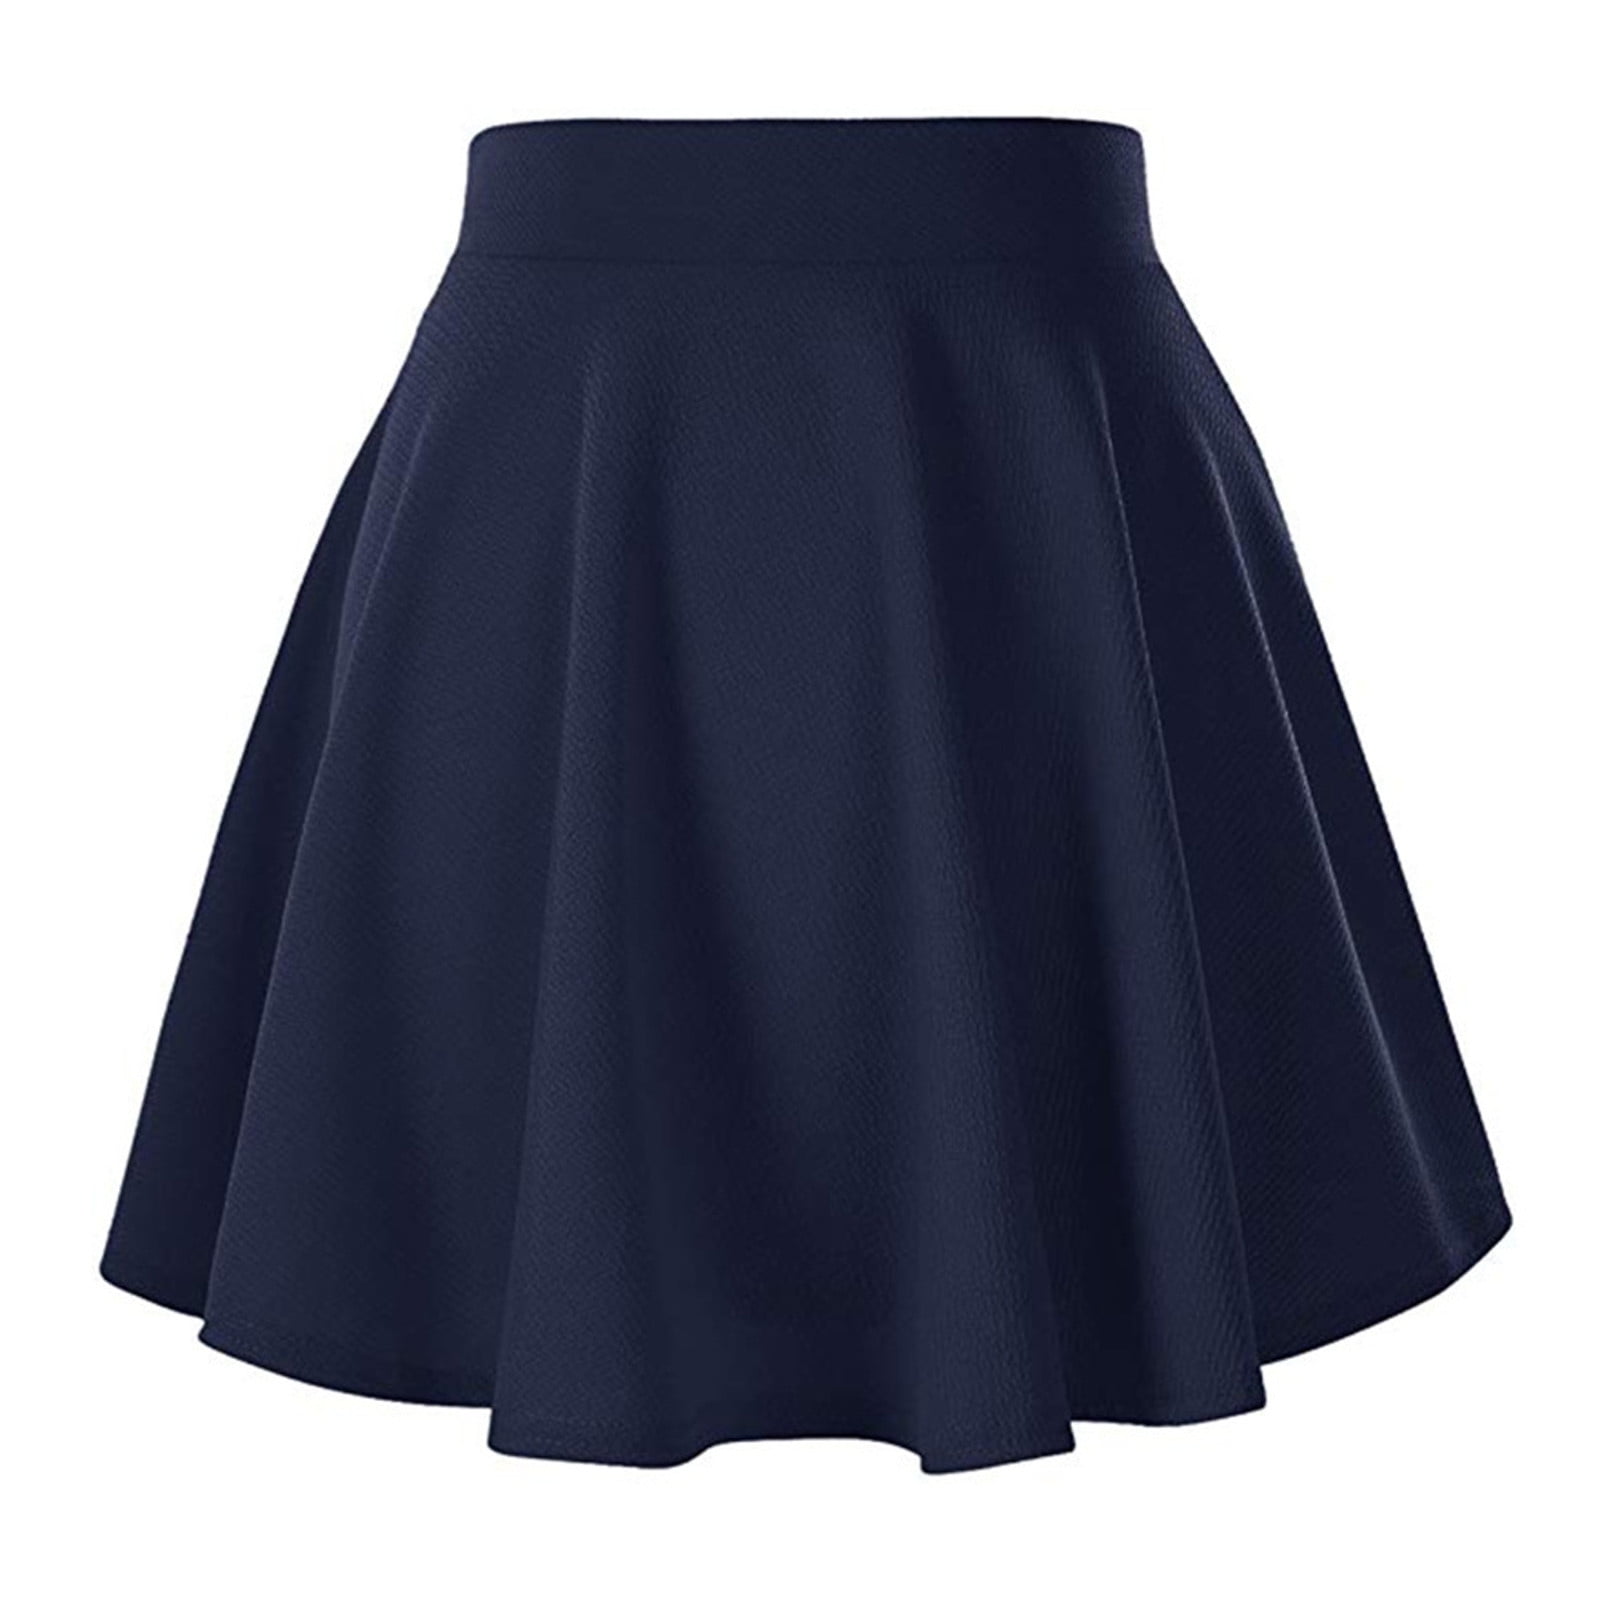 MRULIC skirts for women Women's Solid Color Basic Versatile Stretchy Flared  Casual Pleats Mini Skirt Navy Blue + L 